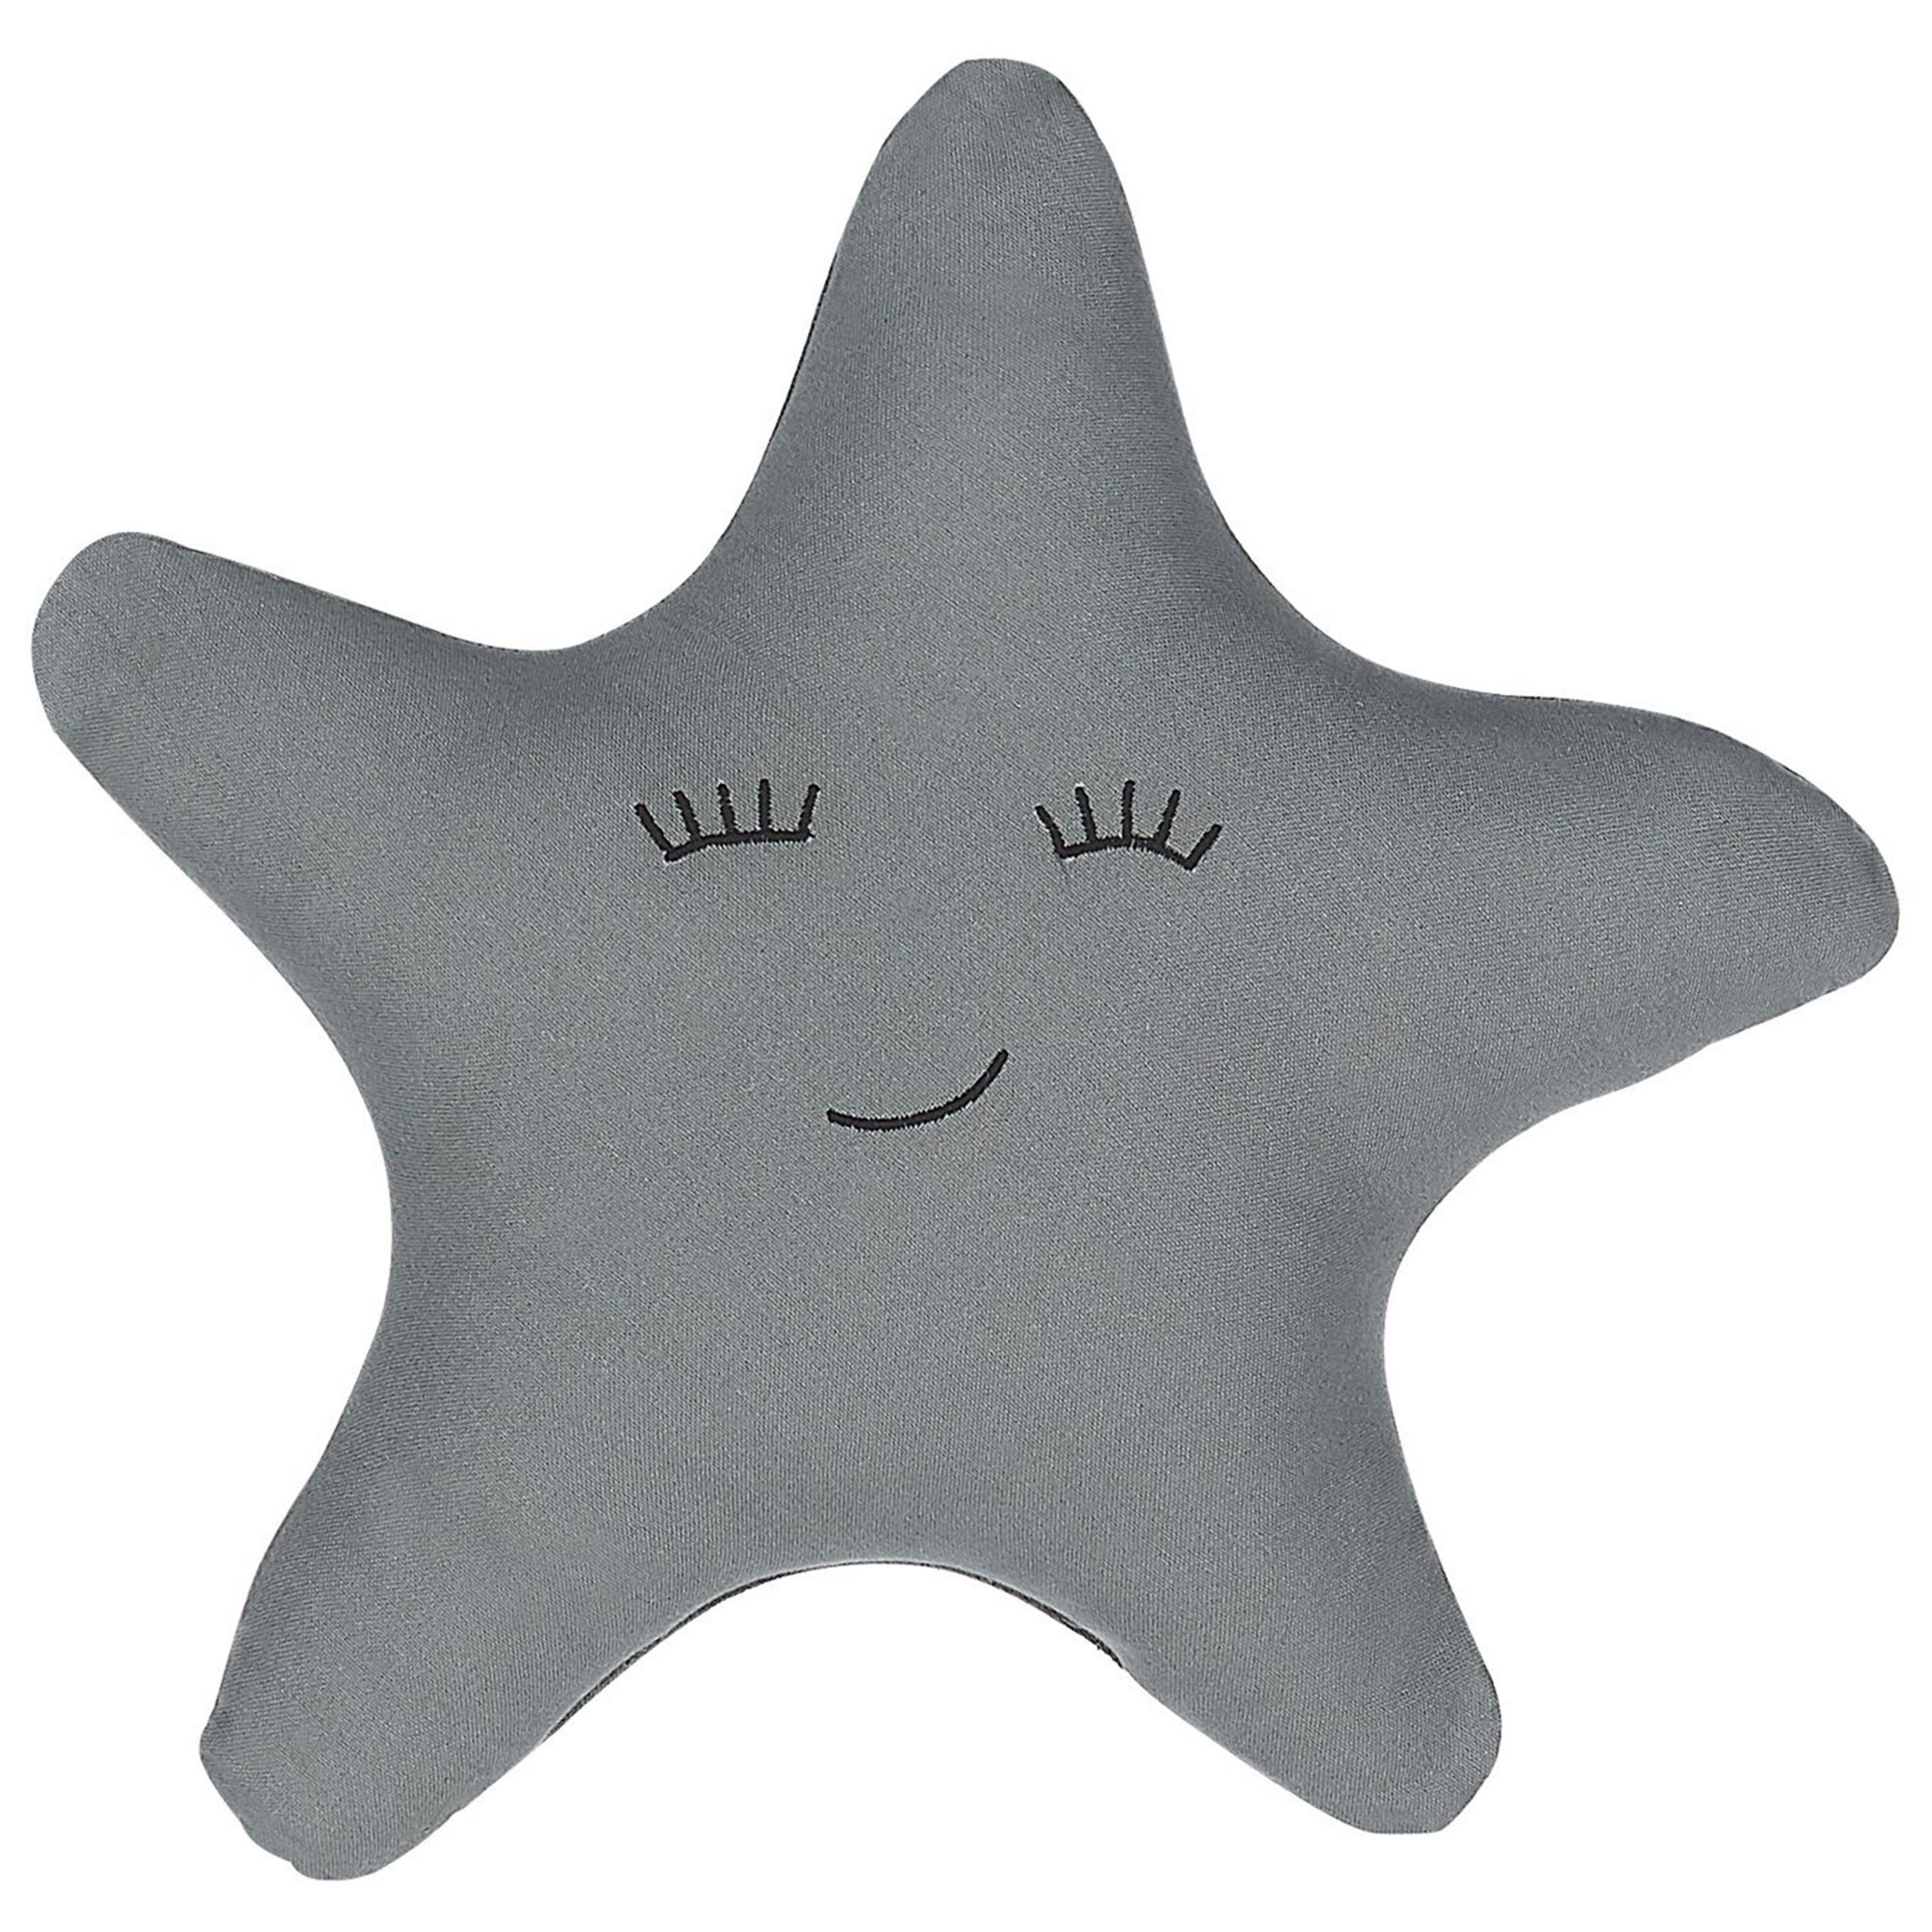 Beliani Kids Cushion Grey Fabric Star Shaped Pillow with Filling Soft Childrens' Toy